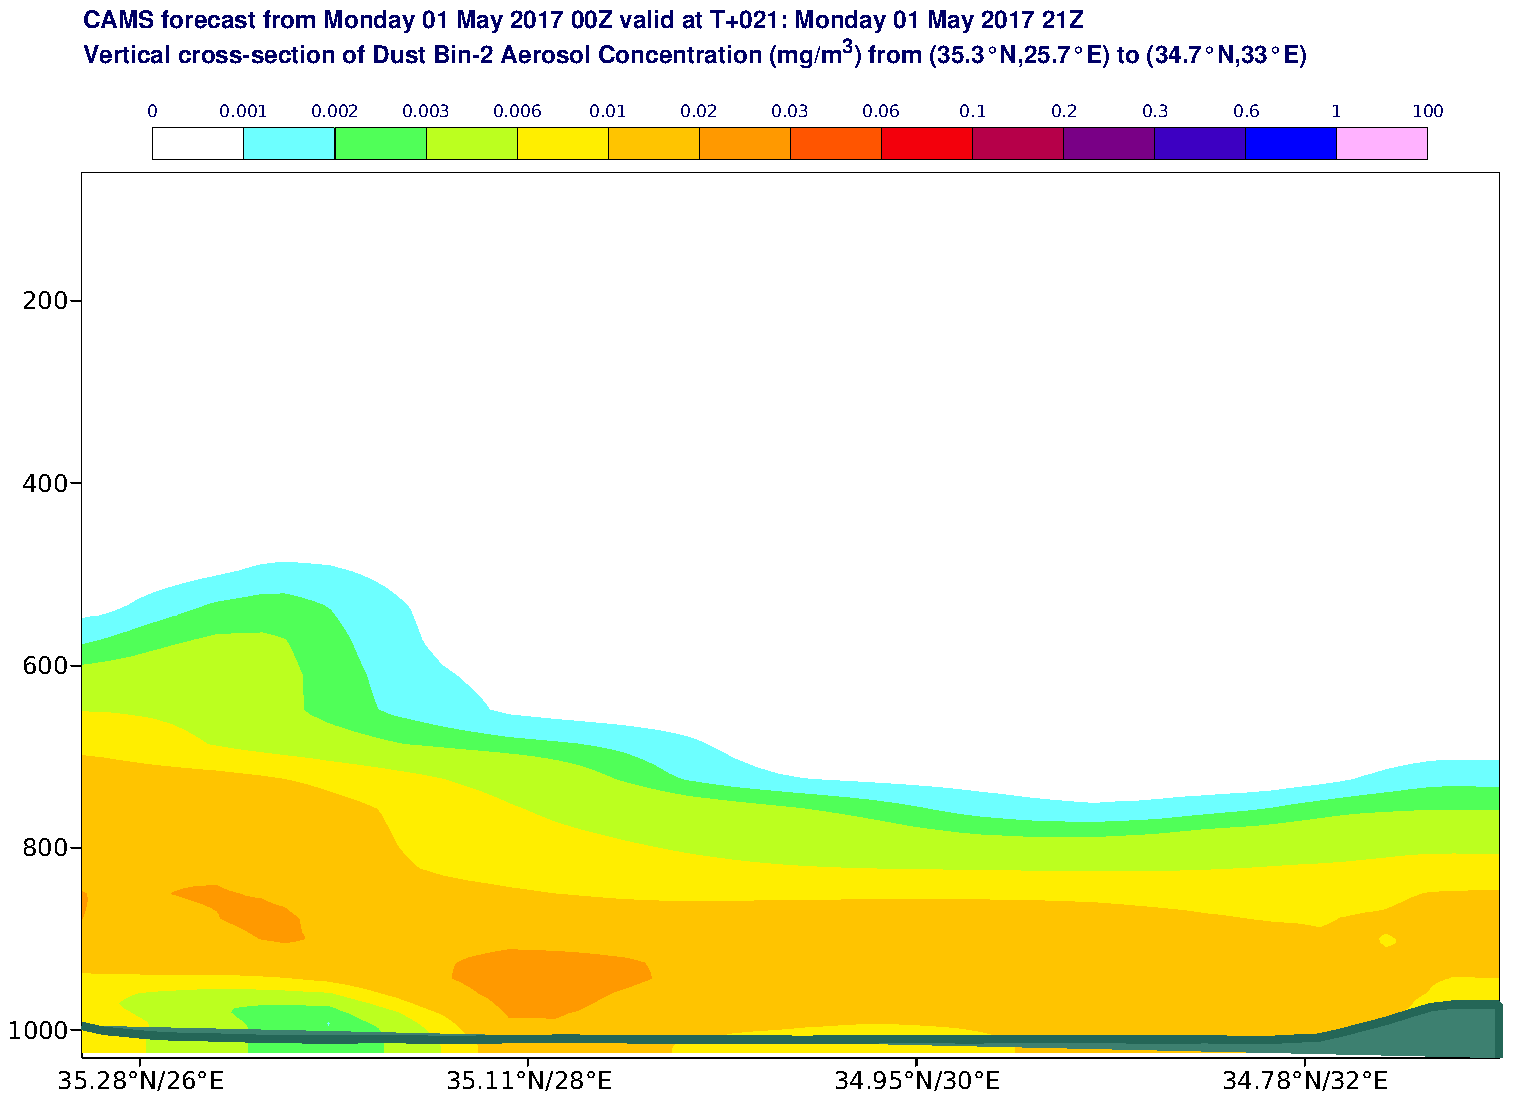 Vertical cross-section of Dust Bin-2 Aerosol Concentration (mg/m3) valid at T21 - 2017-05-01 21:00